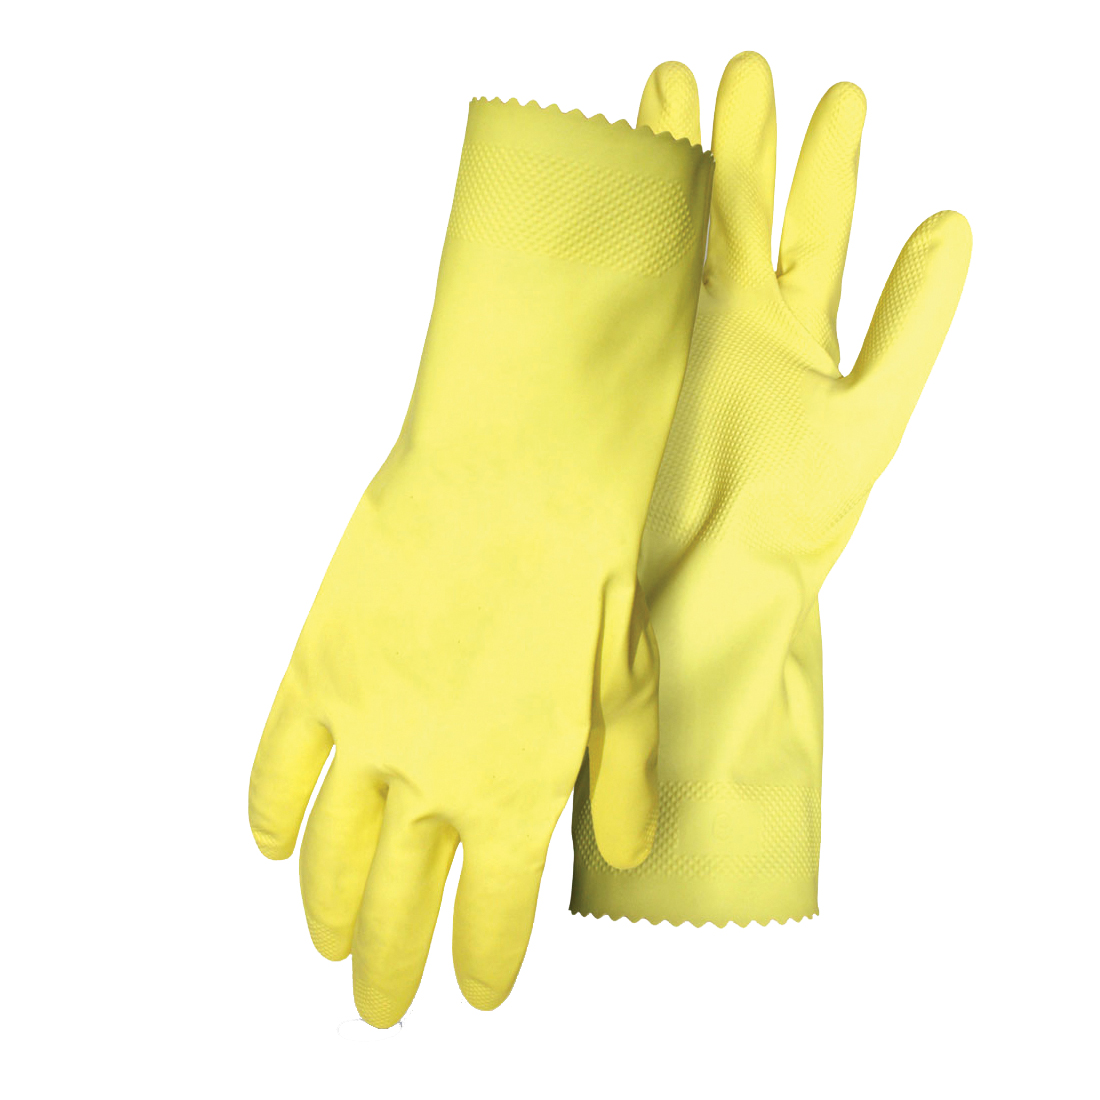 958M Gloves, M, 12 in L, Latex, Yellow